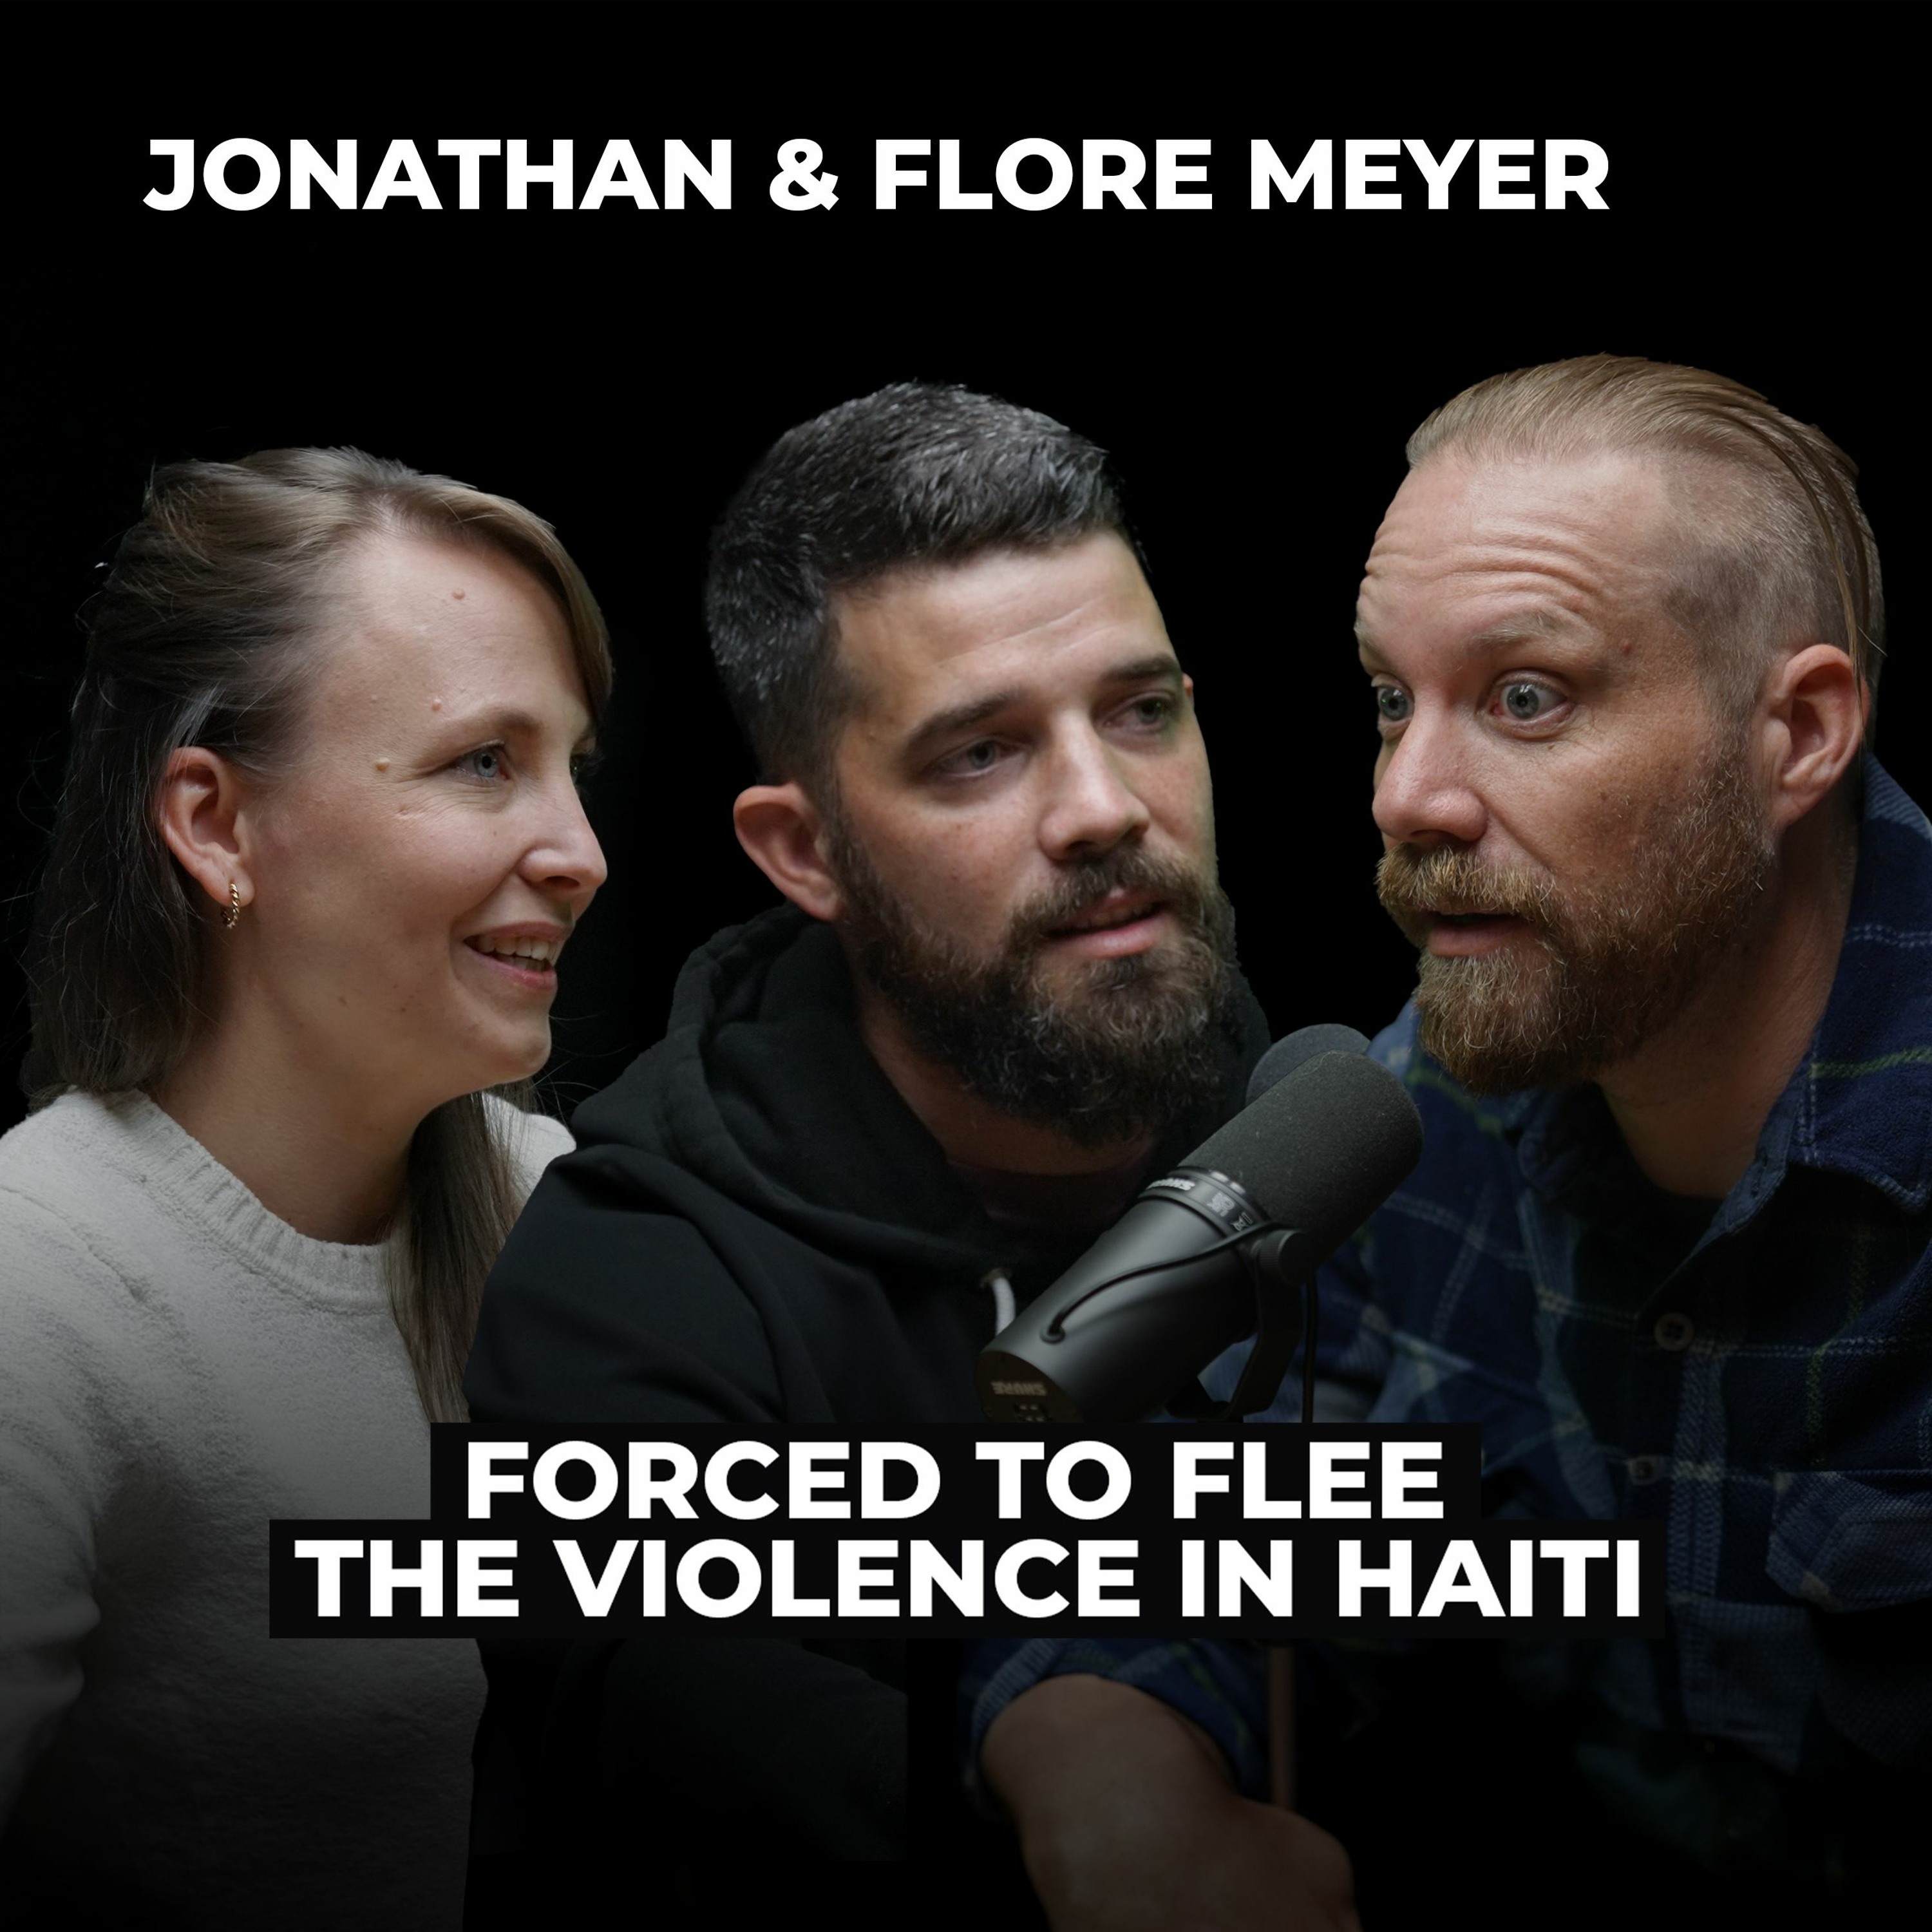 Jonathan & Flore Meyer: Forced To Flee the Violence in Haiti